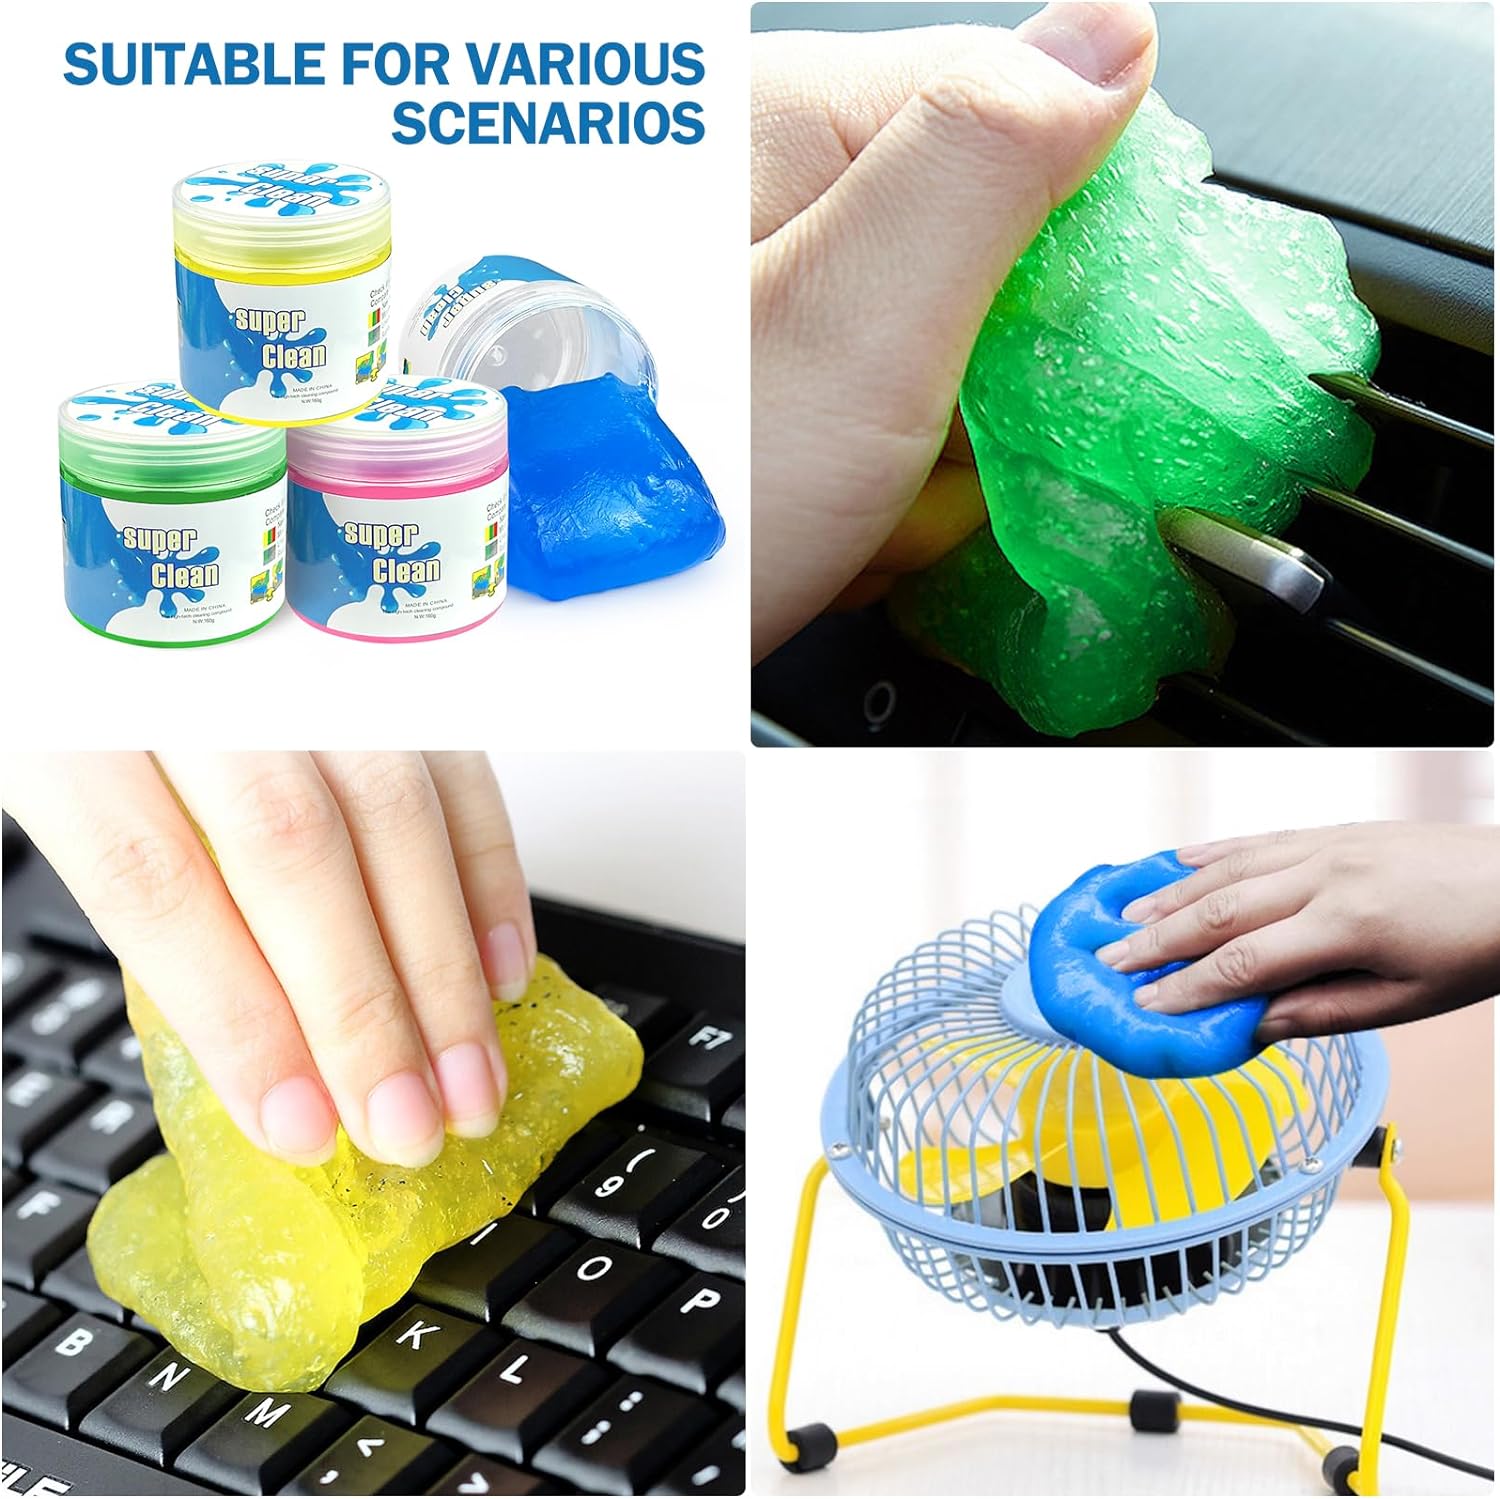 Cleaning Gel for Car, Universal Auto Detailing Tools, Car Crevice Interior Cleaner Putty Gel, Cleaning Kit Dust Cleaning Mud for Car Vents, PC, Laptops, Cameras, Keyboard